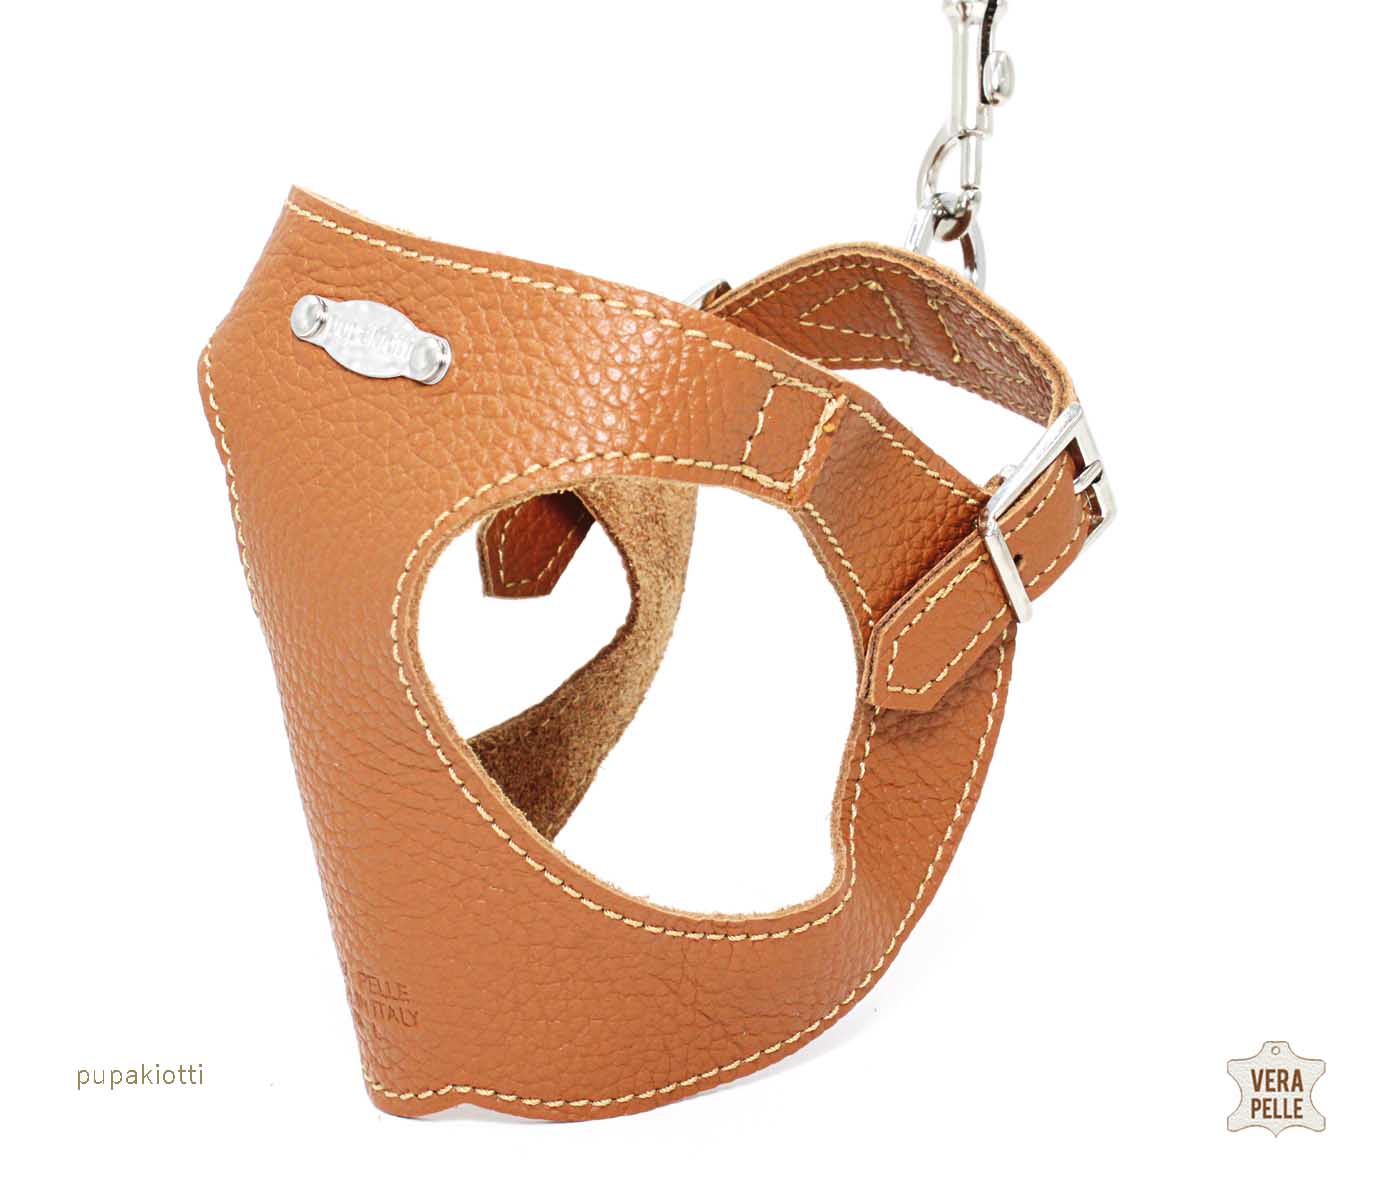 Basic. Ergonomic and adjustable leather harness for dogs